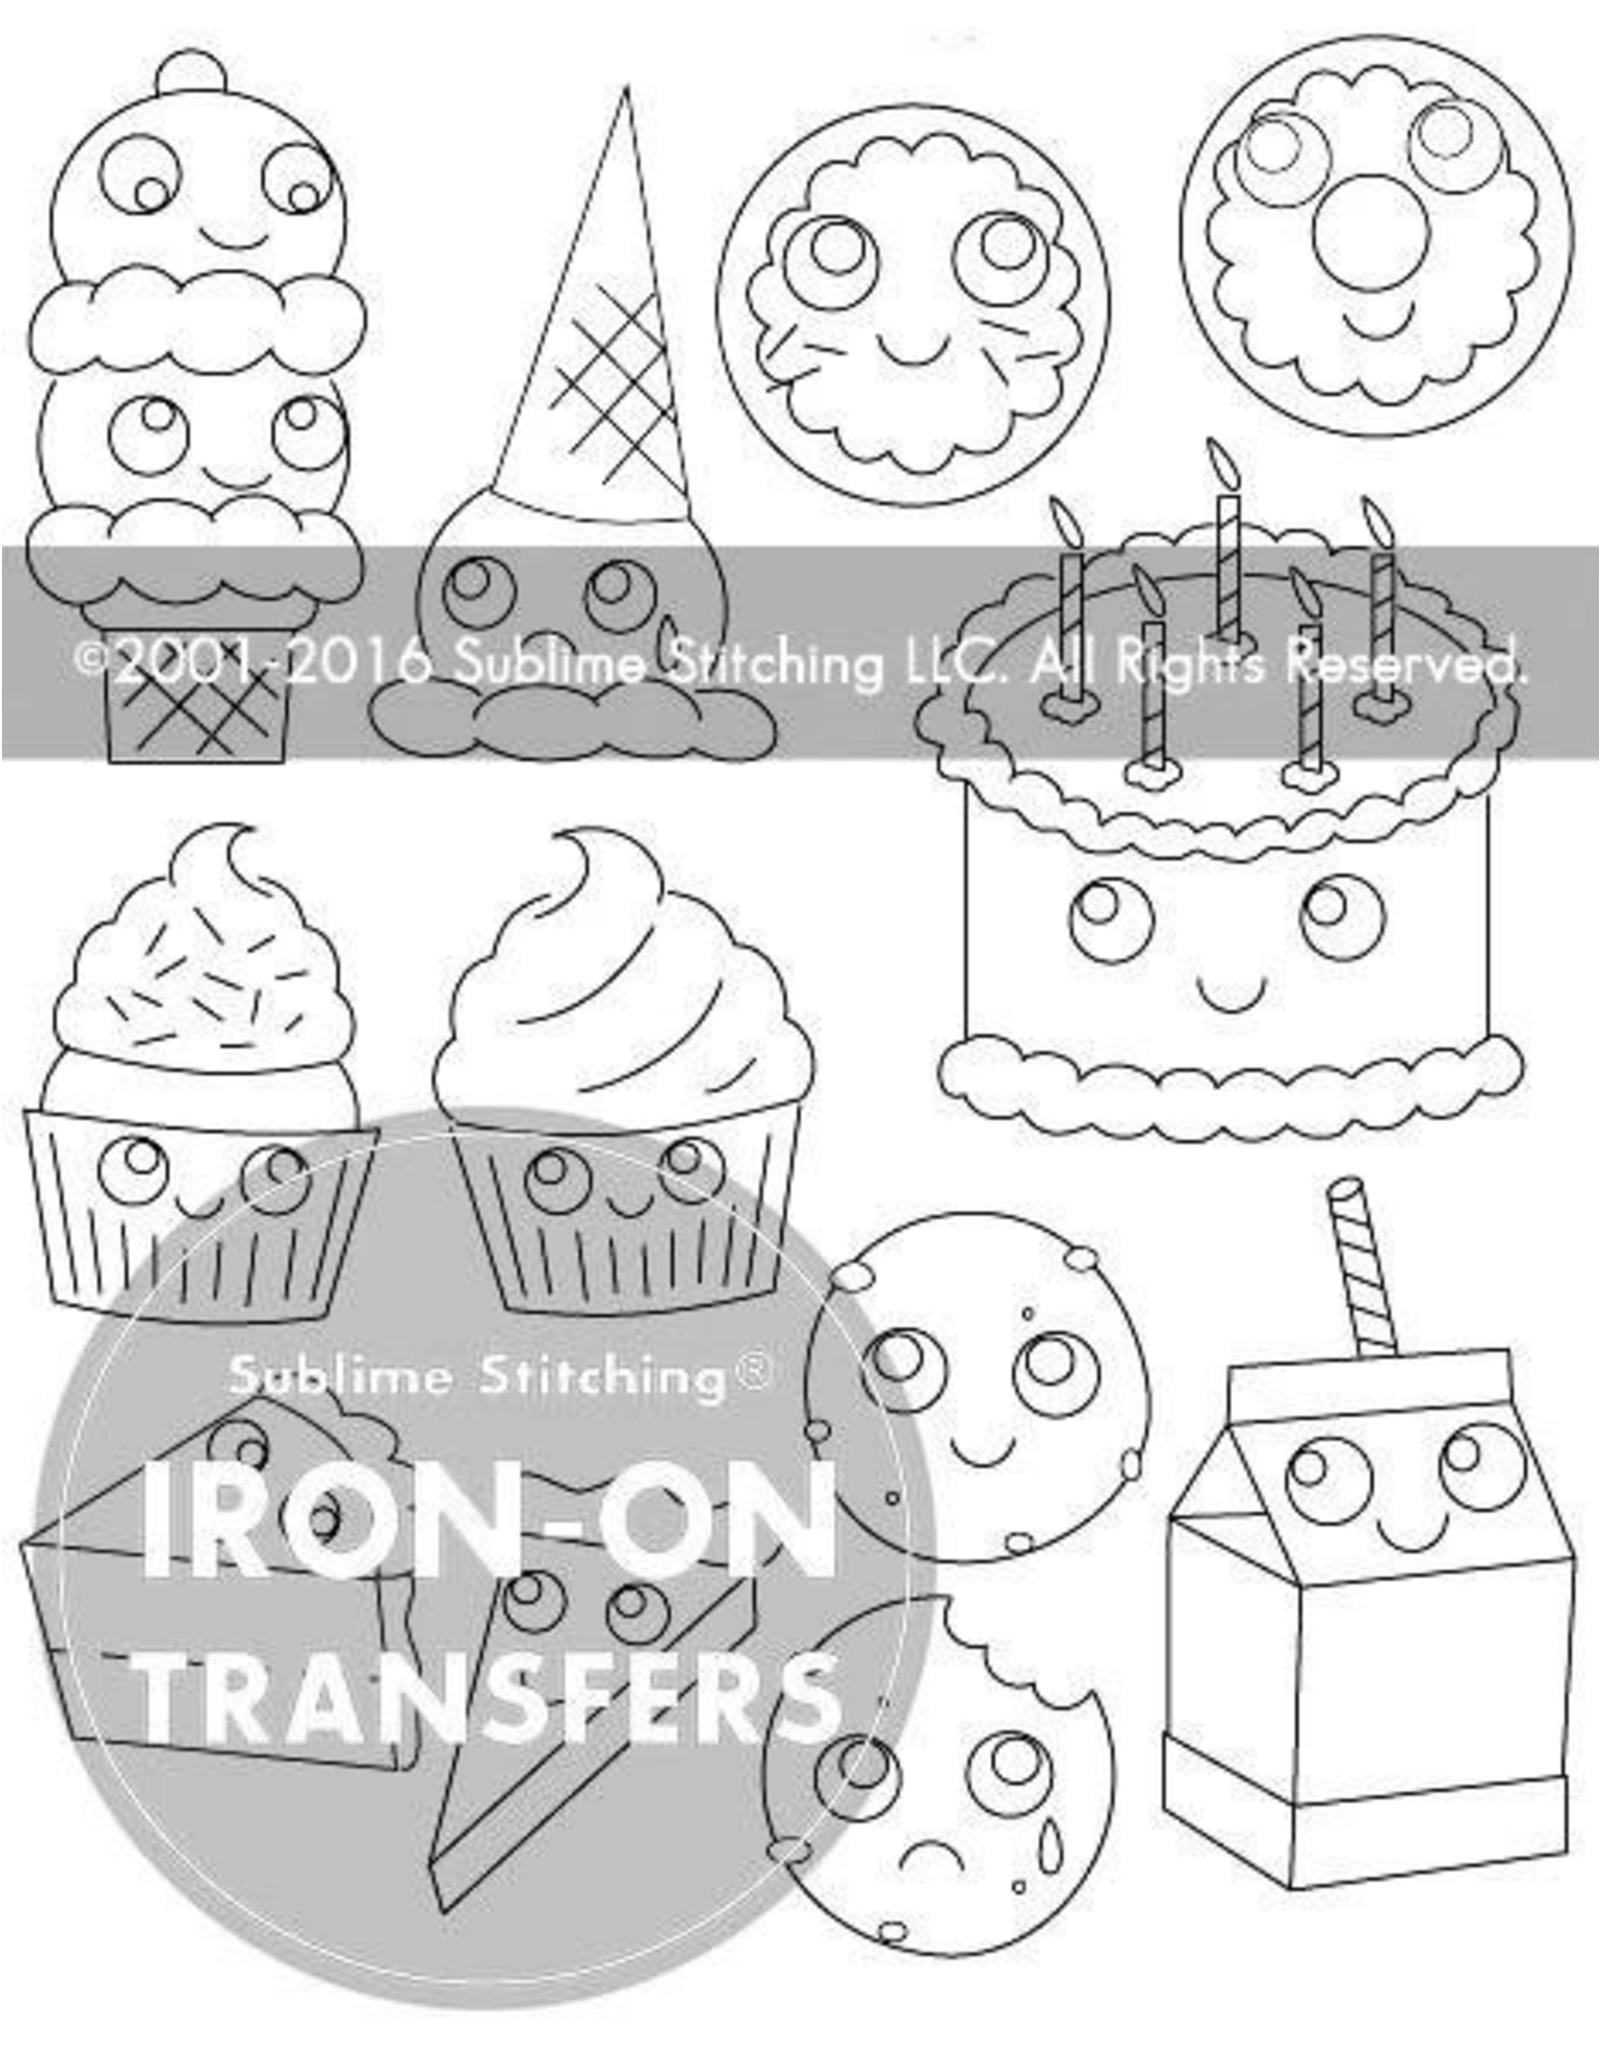 Embroidery Iron-On Transfers, Sweet Treats, from Sublime Stitching